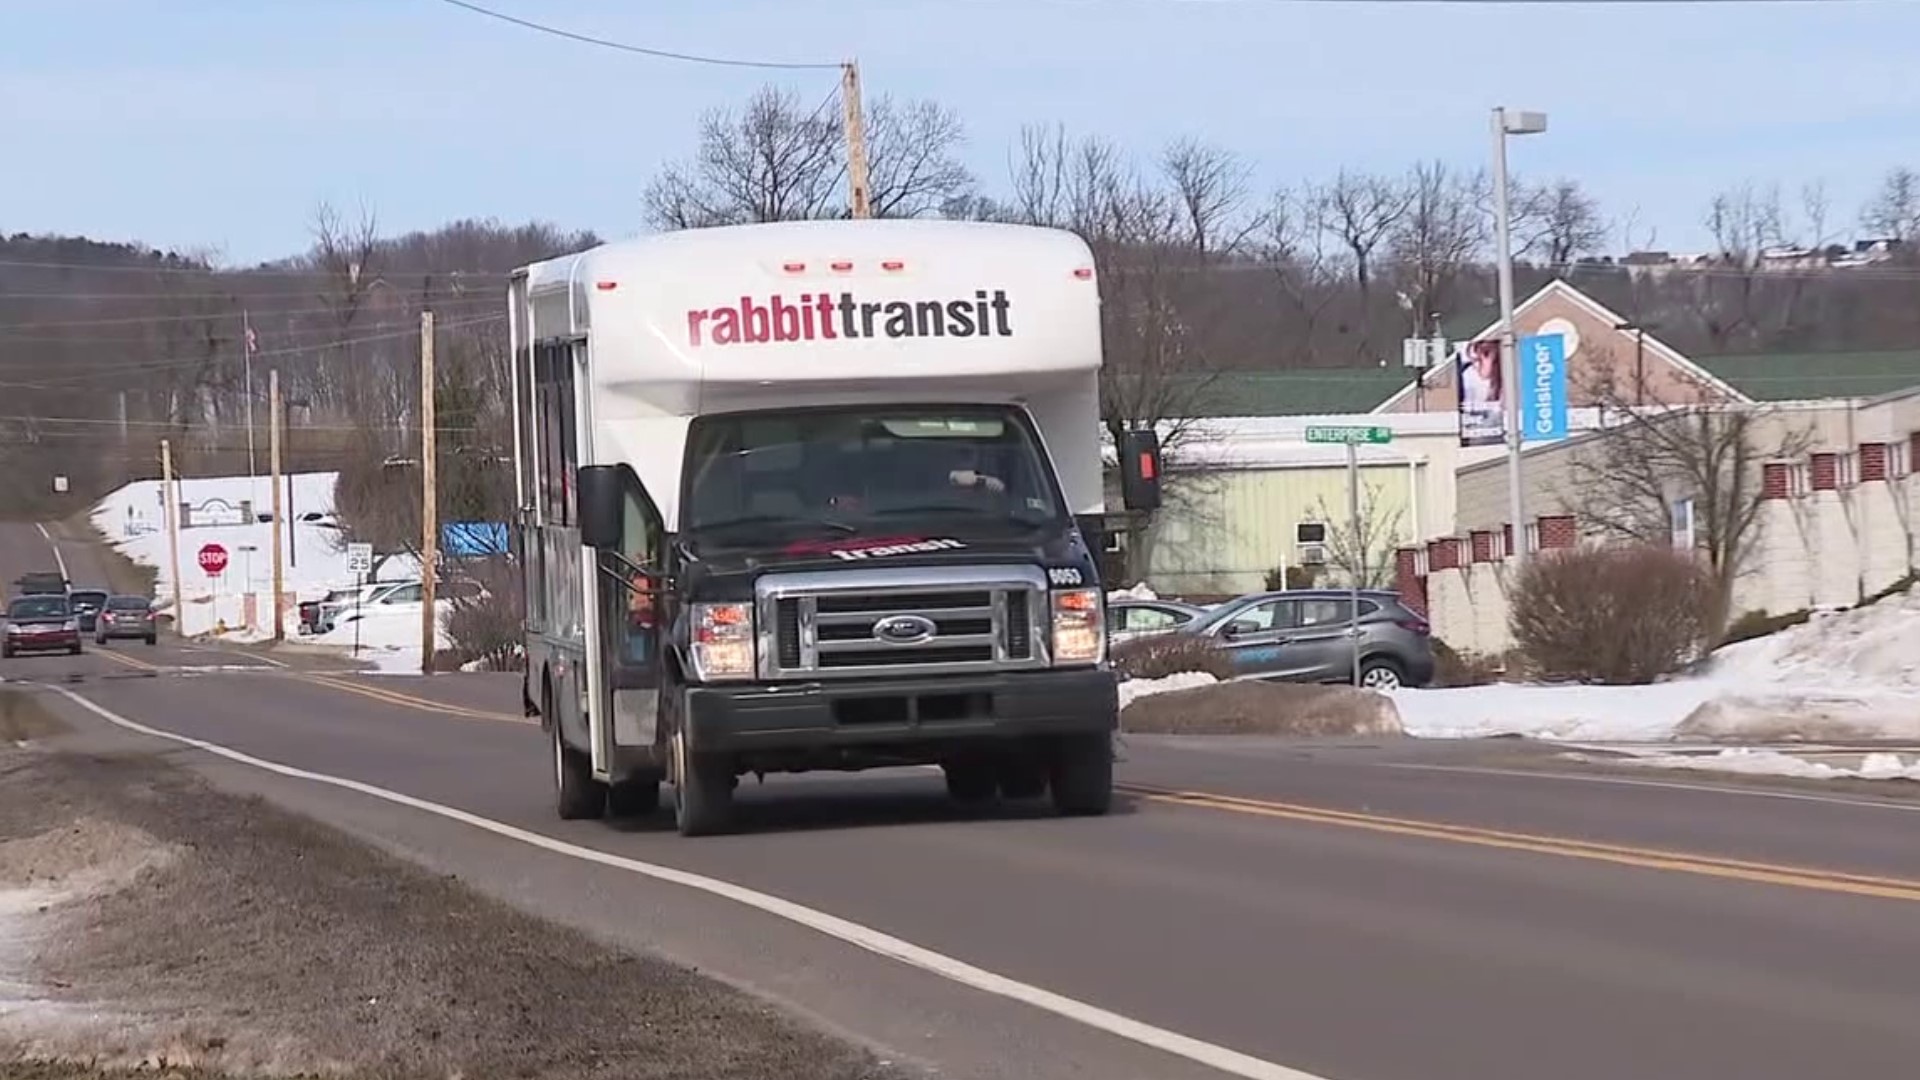 Access to public transportation has always been an issue in rural areas, but that's about to change in central Pennsylvania.